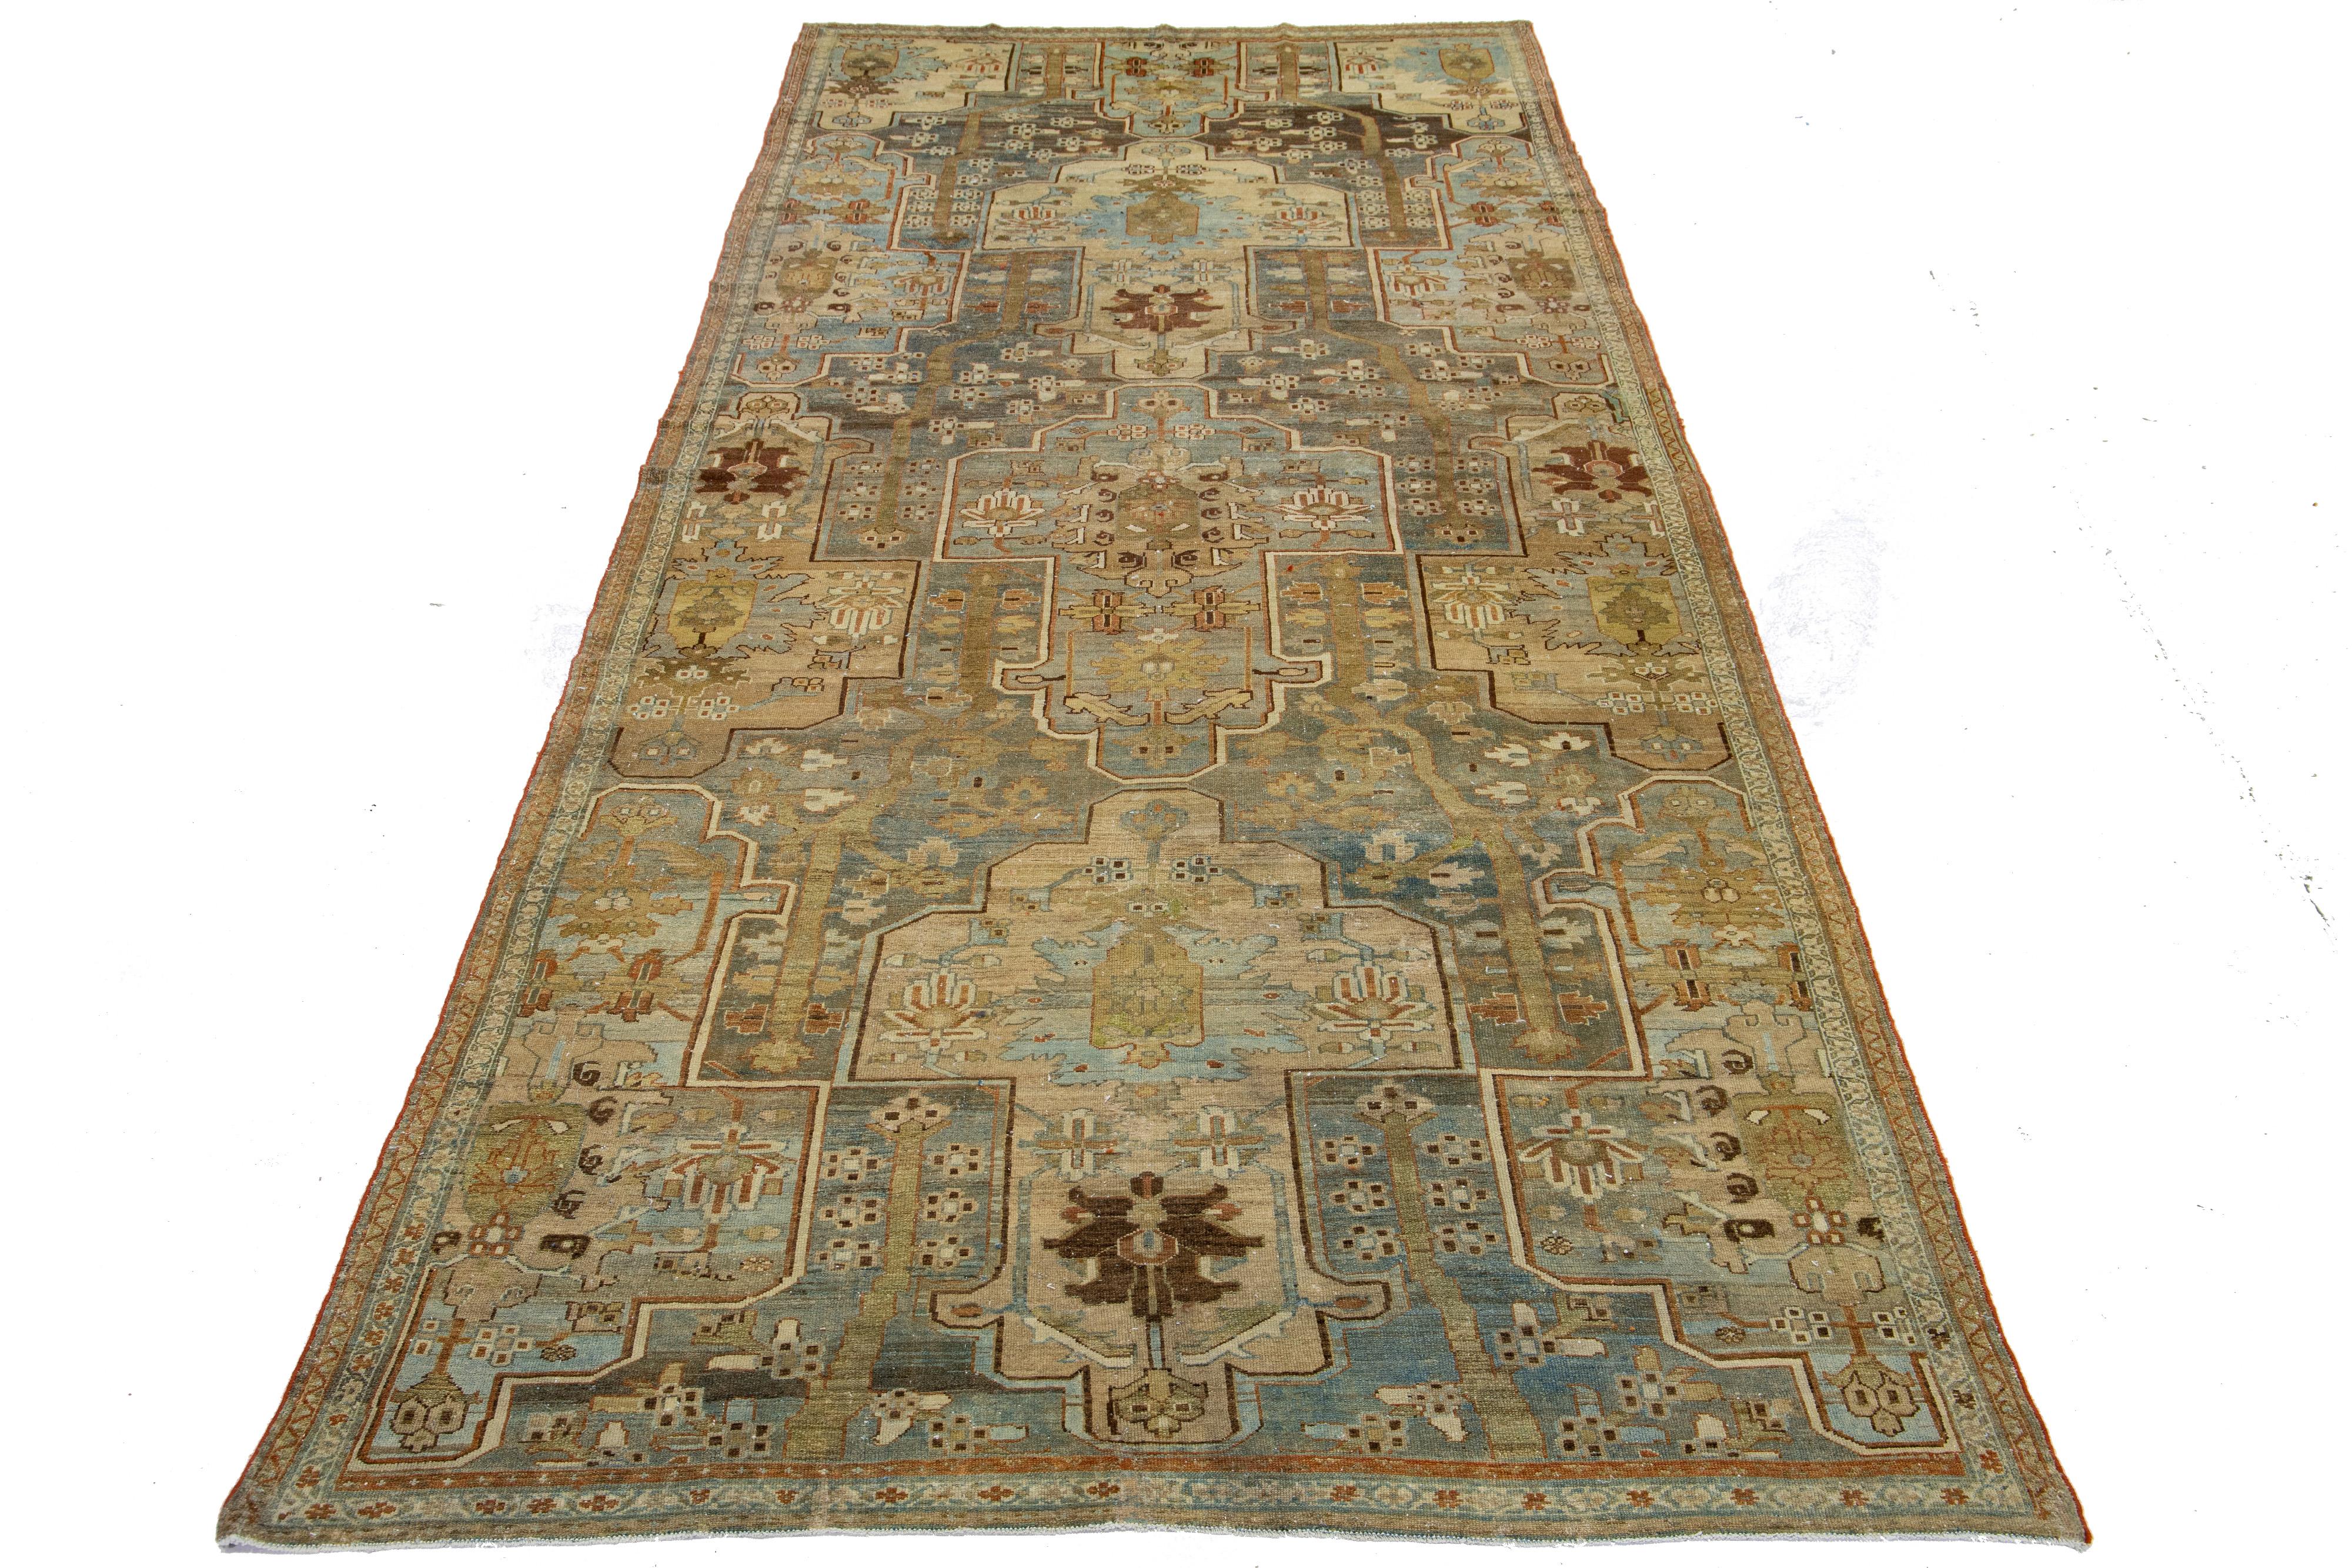 This exceptional antique Persian Malayer rug is crafted from handwoven wool. The design features a beautiful combination of blue and brown as the base, enhanced with beige and orange highlights in a stunning and intricately detailed classical floral